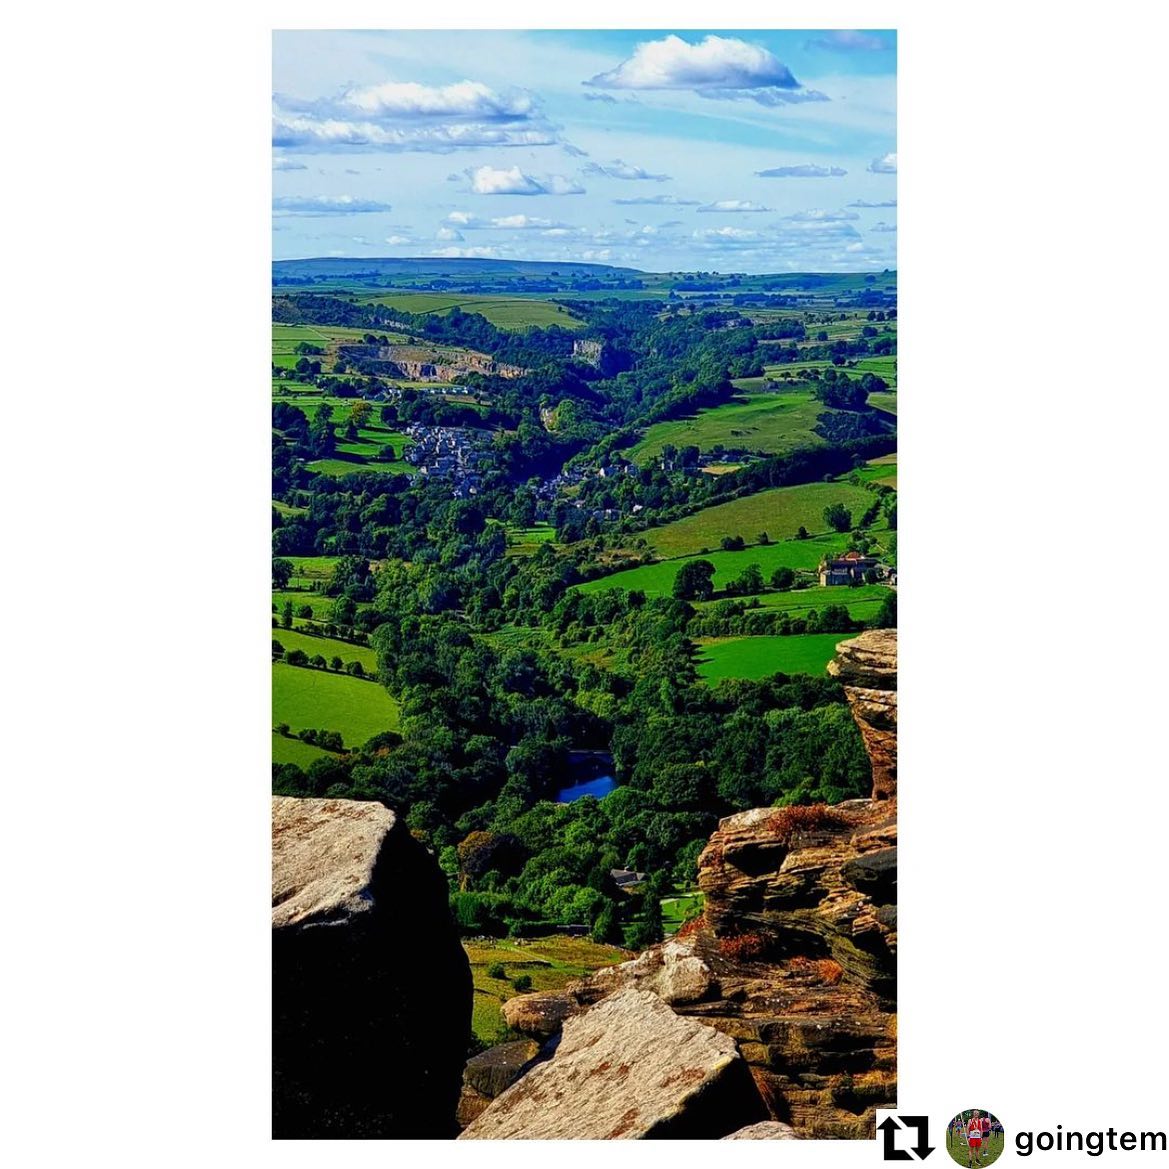 Repost from @goingtem 

A stunning day to be out in the Peak District - leading a group from @por...